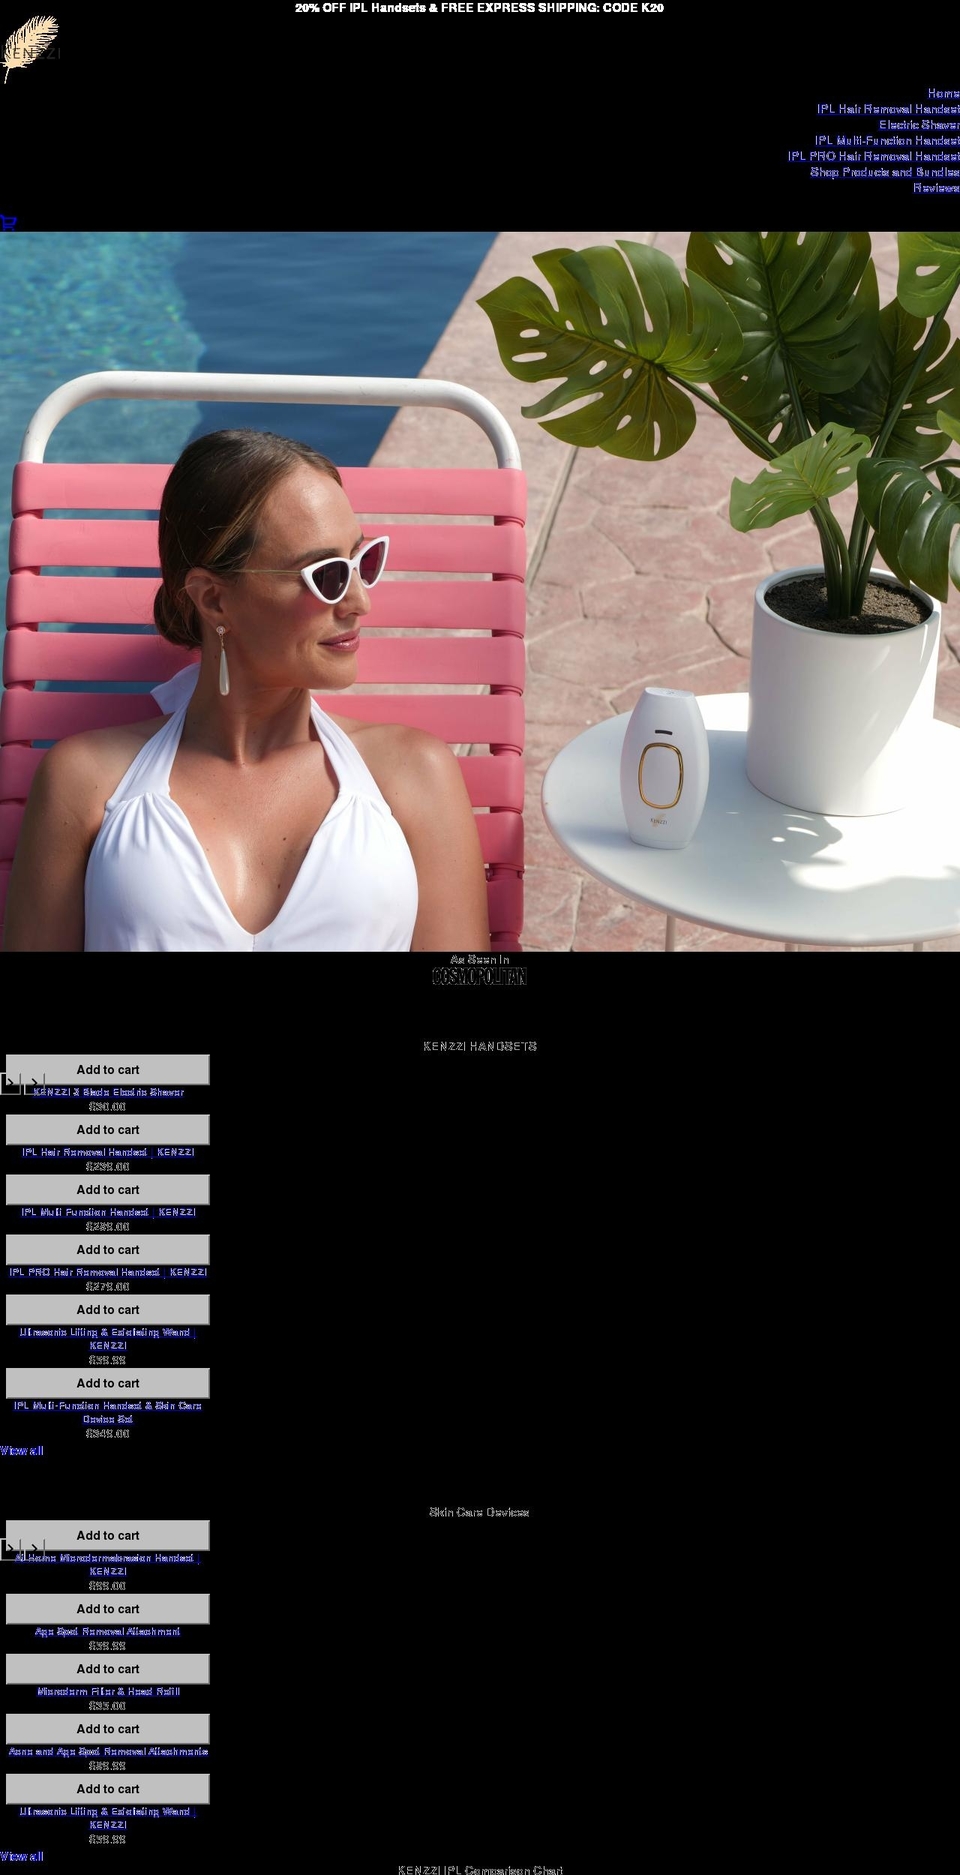 Whisk Shopify theme site example kenzzi.com